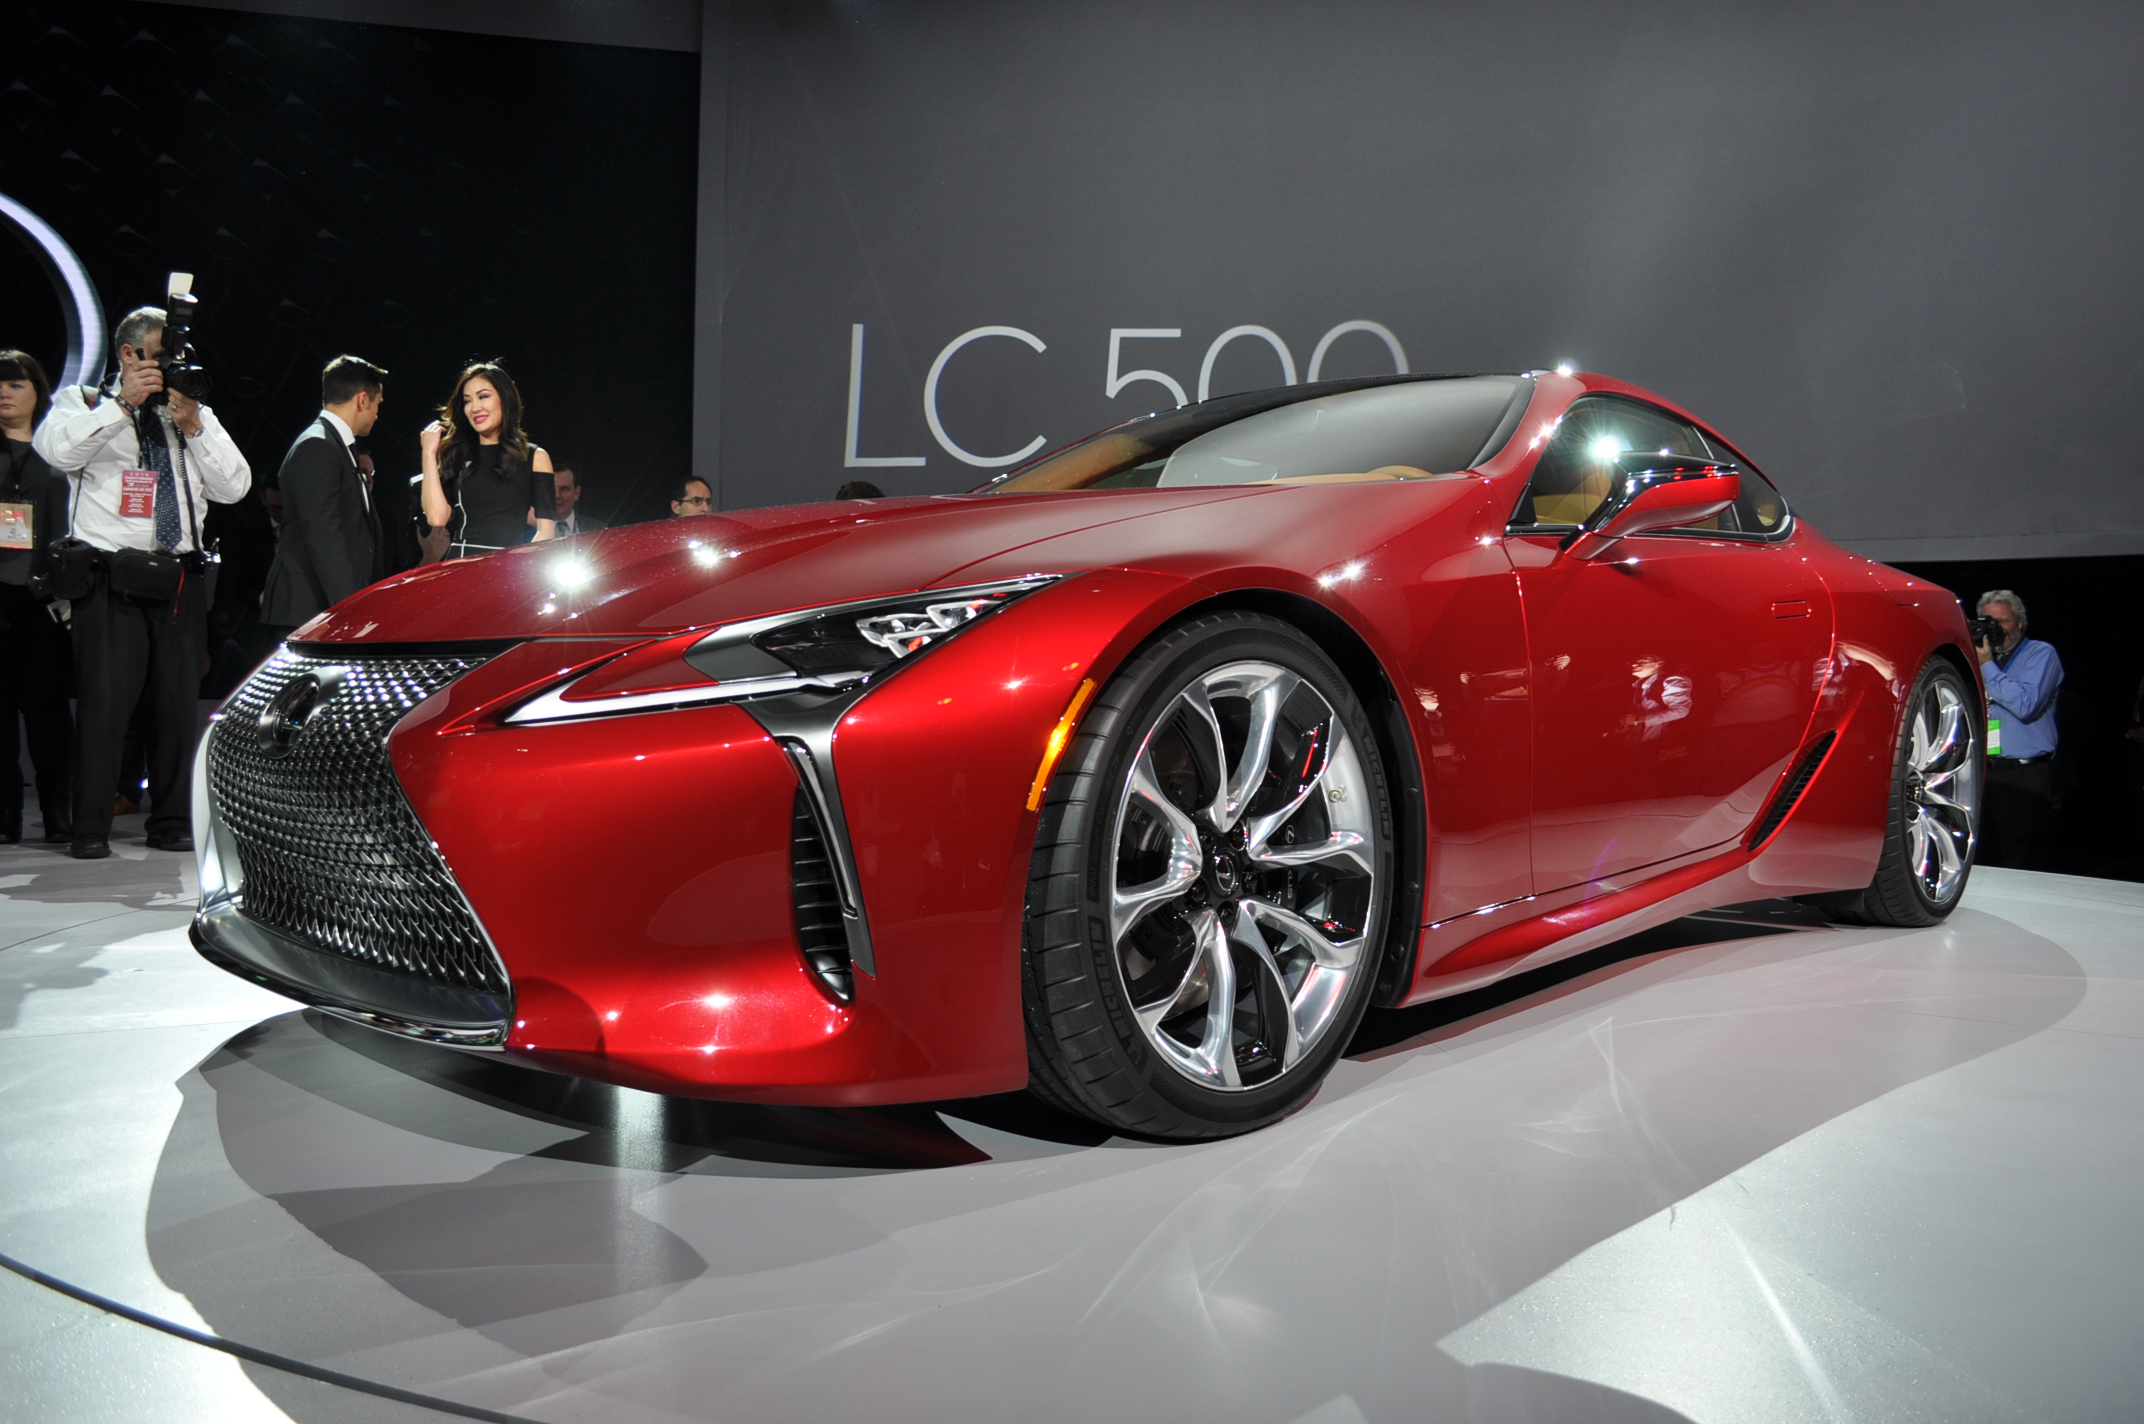 2018 Lexus Lc Coupe Bows With V 8 Power 10 Speed Auto